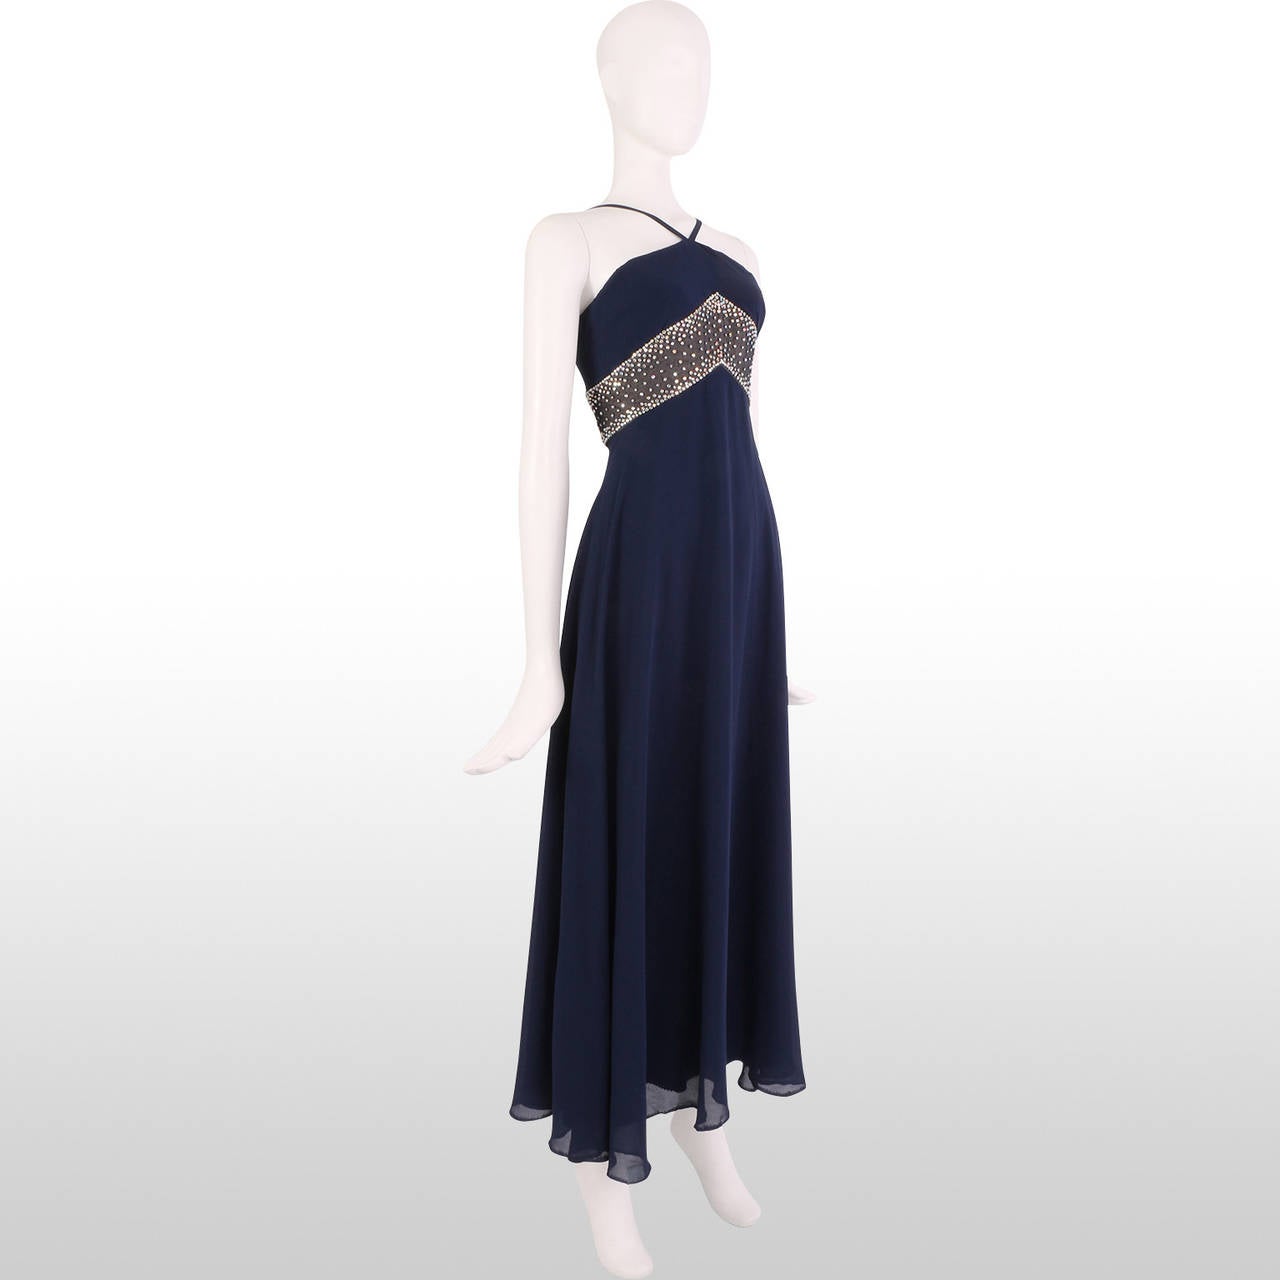 This elegant 1960's royal blue halter gown is a great piece for a special occasion. The vibrant royal blue colour is accentuated with the gem detailing which embellishes the garment just under the bust. The lightweight chiffon fabric overlay drapes